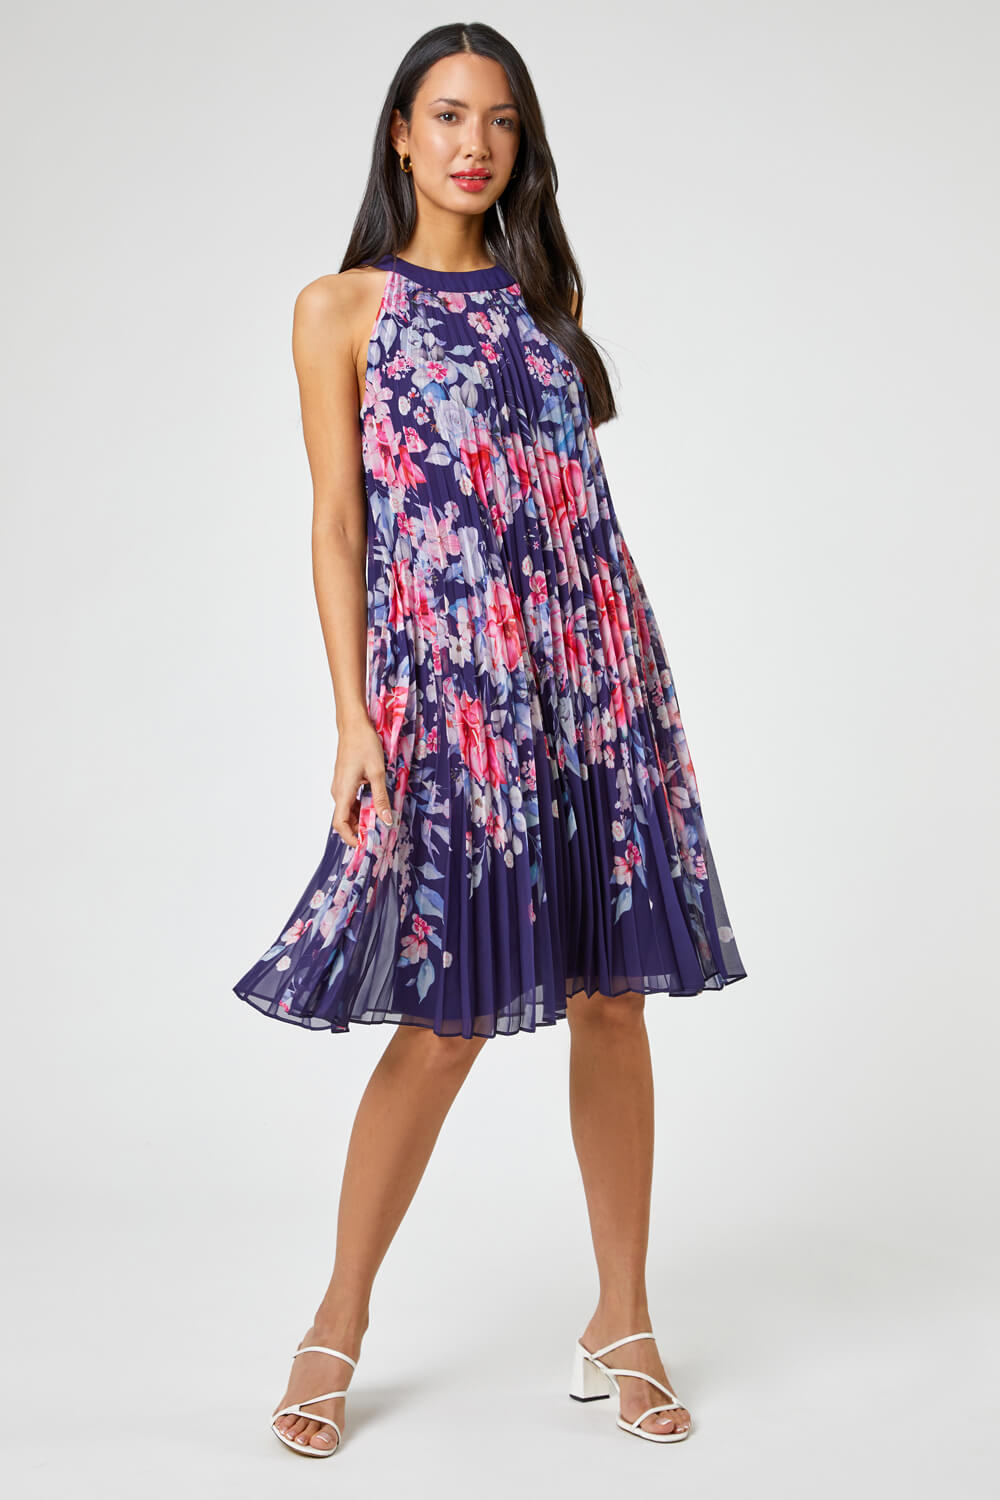 Navy  Floral High Neck Pleated Chiffon Swing Dress, Image 3 of 5